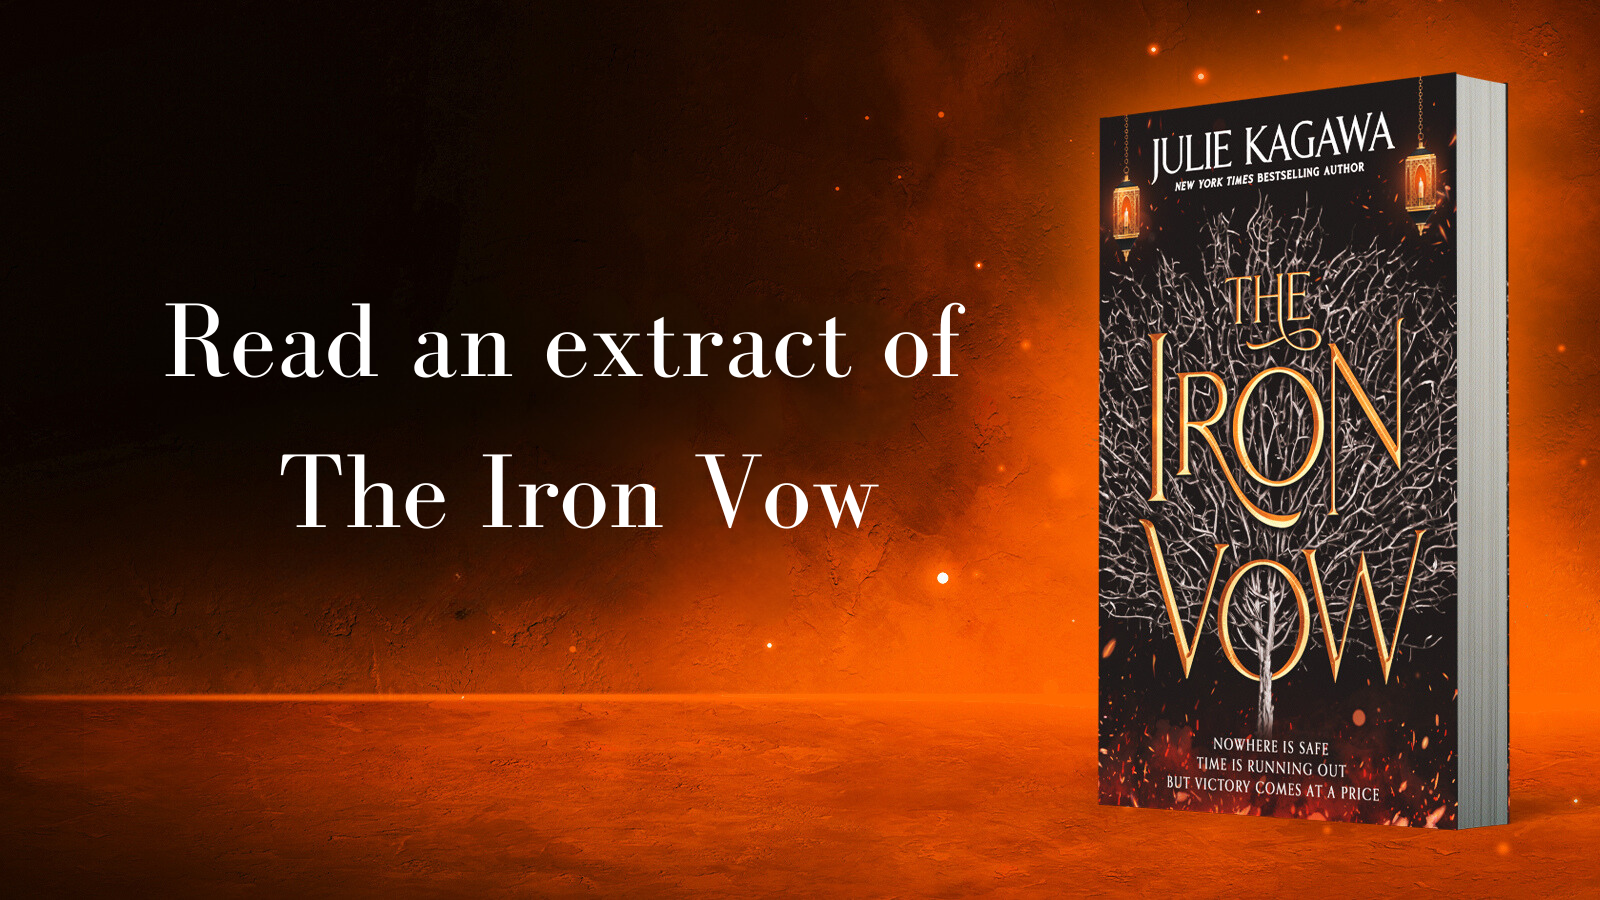 Image shows the cover of The Iron Vow on a fiery background with the text 'Read an extract of The Iron Vow' overlain.